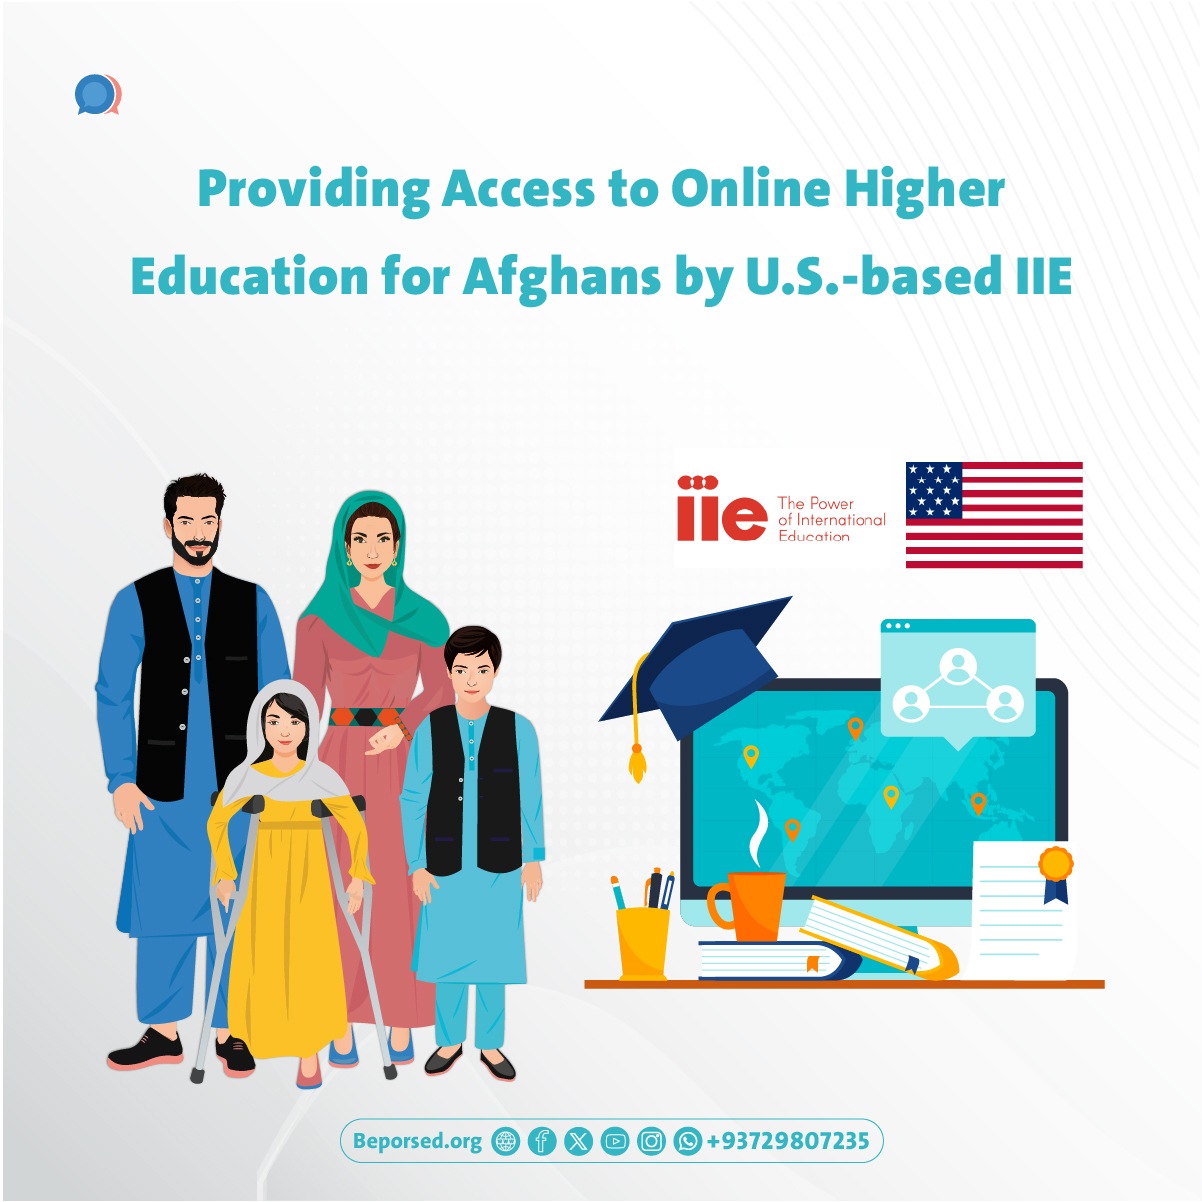 Supporting Access to Online Higher Education for Afghans by U.S.-based IIE 03.jpg